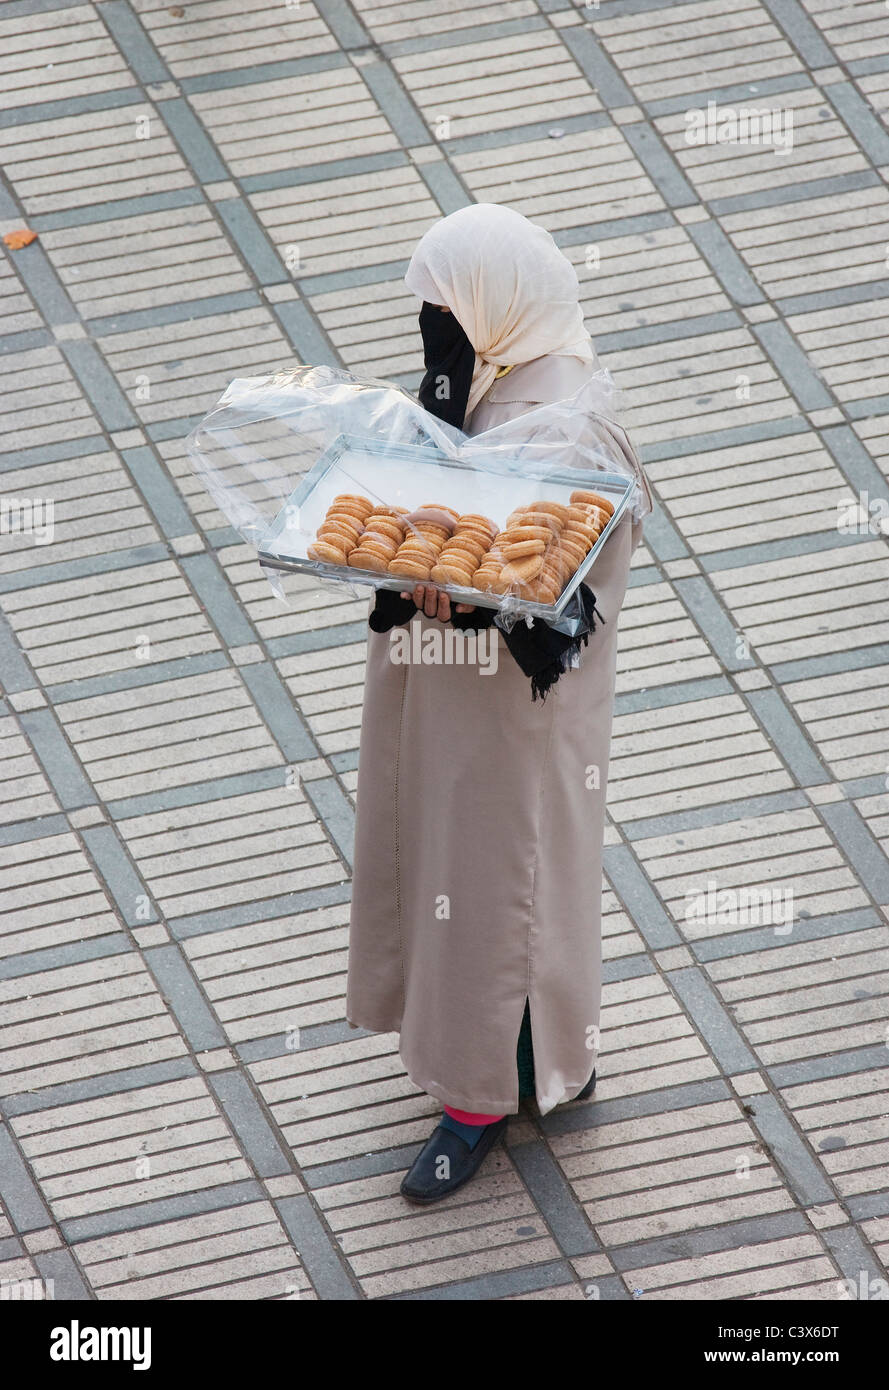 Woman selling cookies at the Djemaa el Fna market place. Marrakesh, Morocco. No model release. Stock Photo